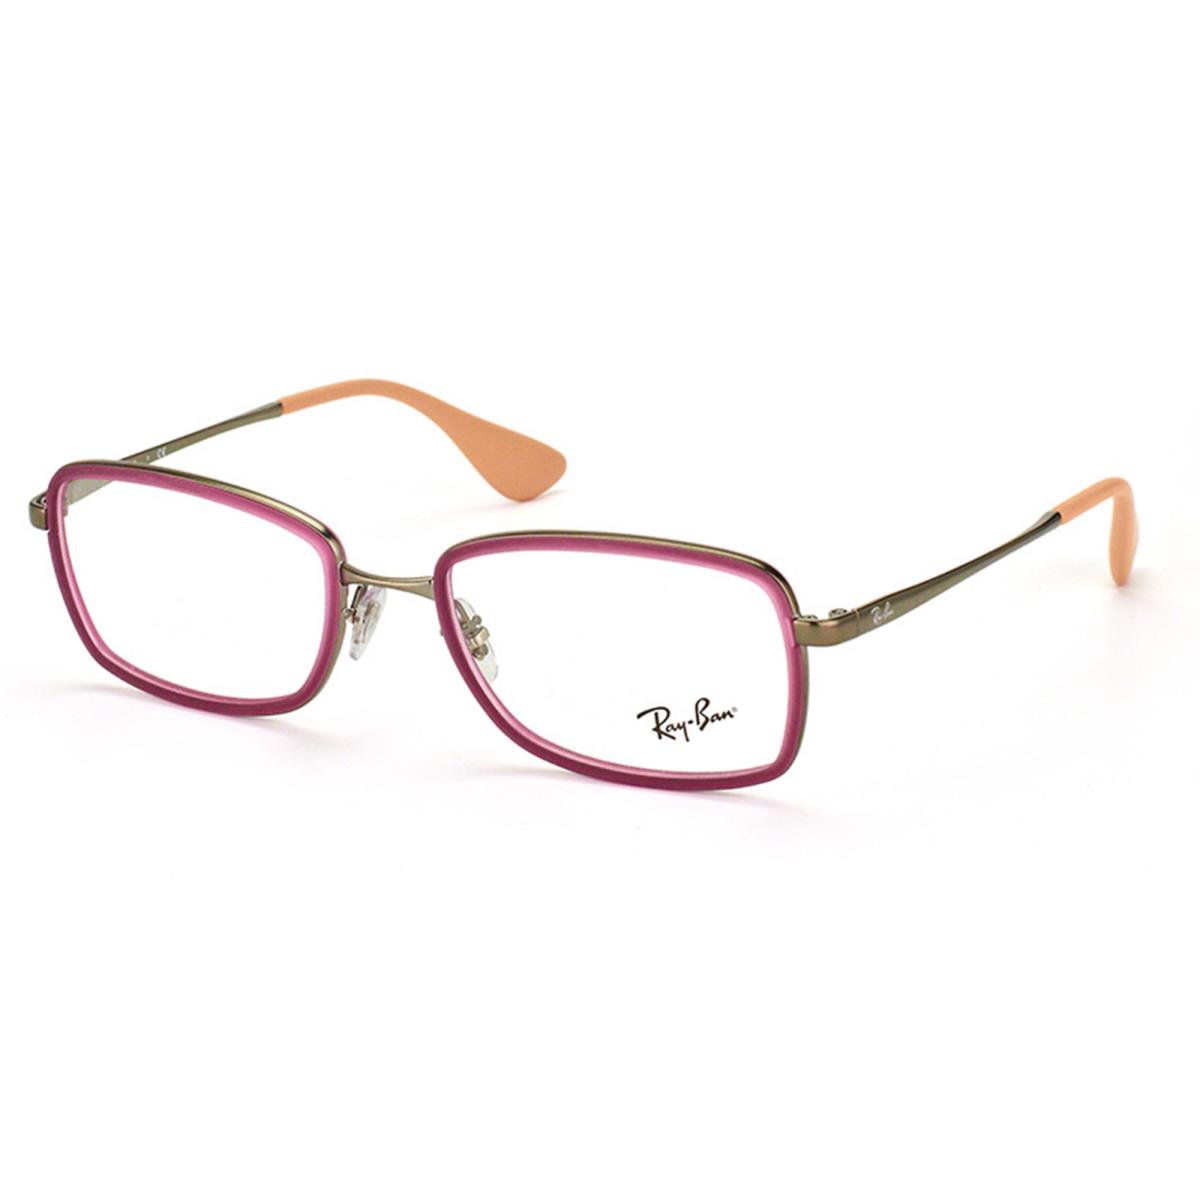 Ray Ban RB 6336 2857 Rubber Fuxia Unisex`s Eyeglasses 51mm 18 140